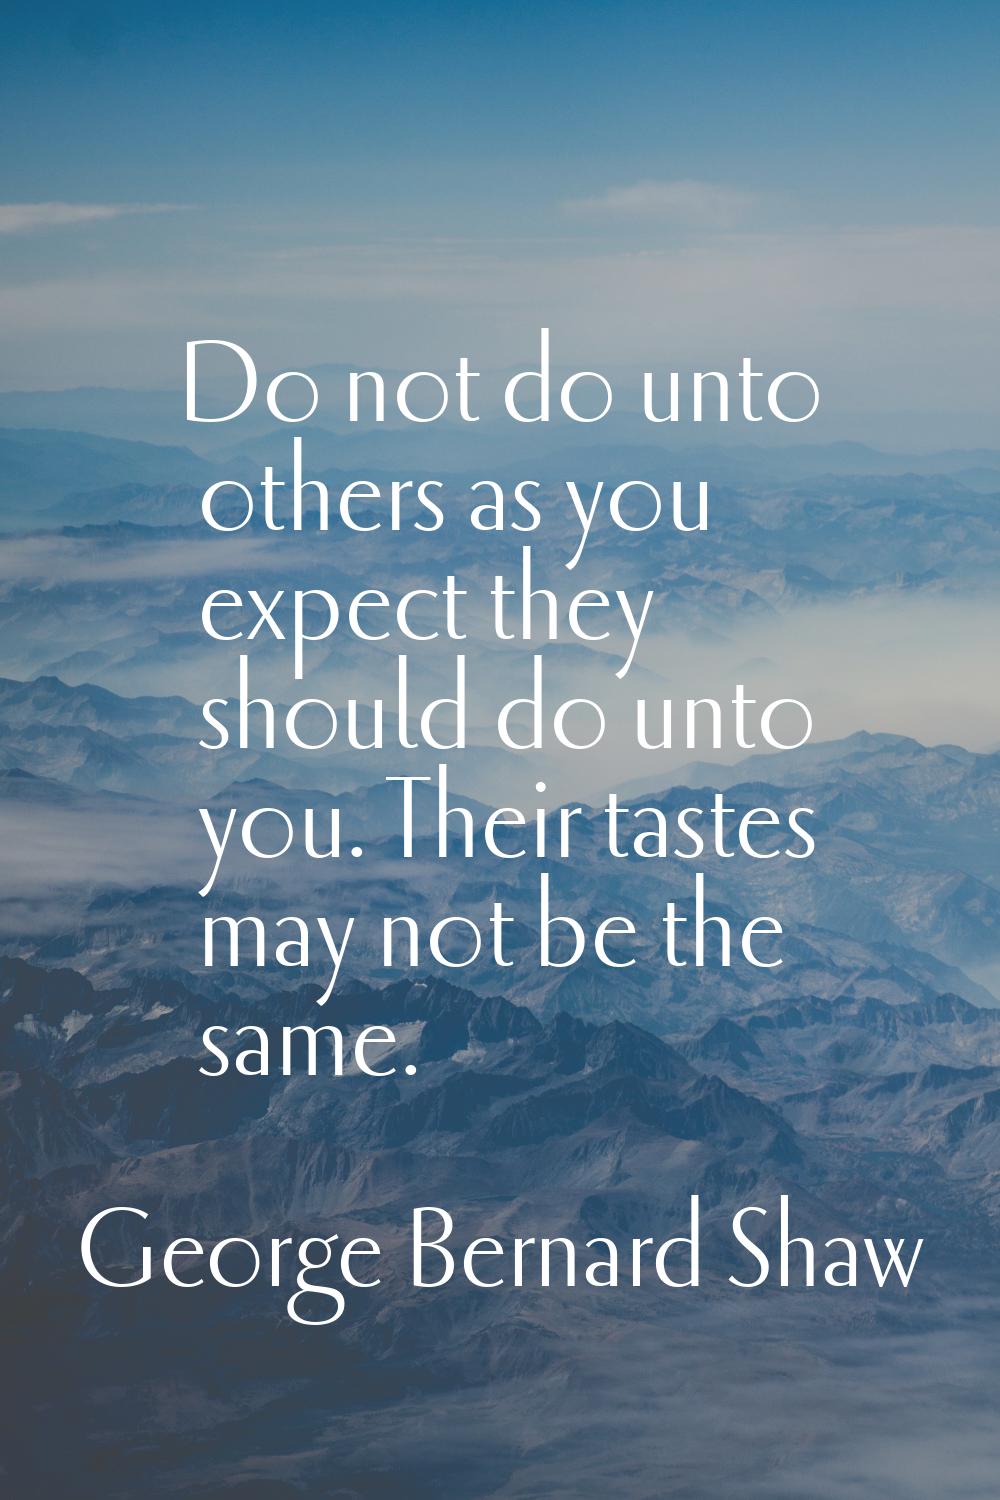 Do not do unto others as you expect they should do unto you. Their tastes may not be the same.